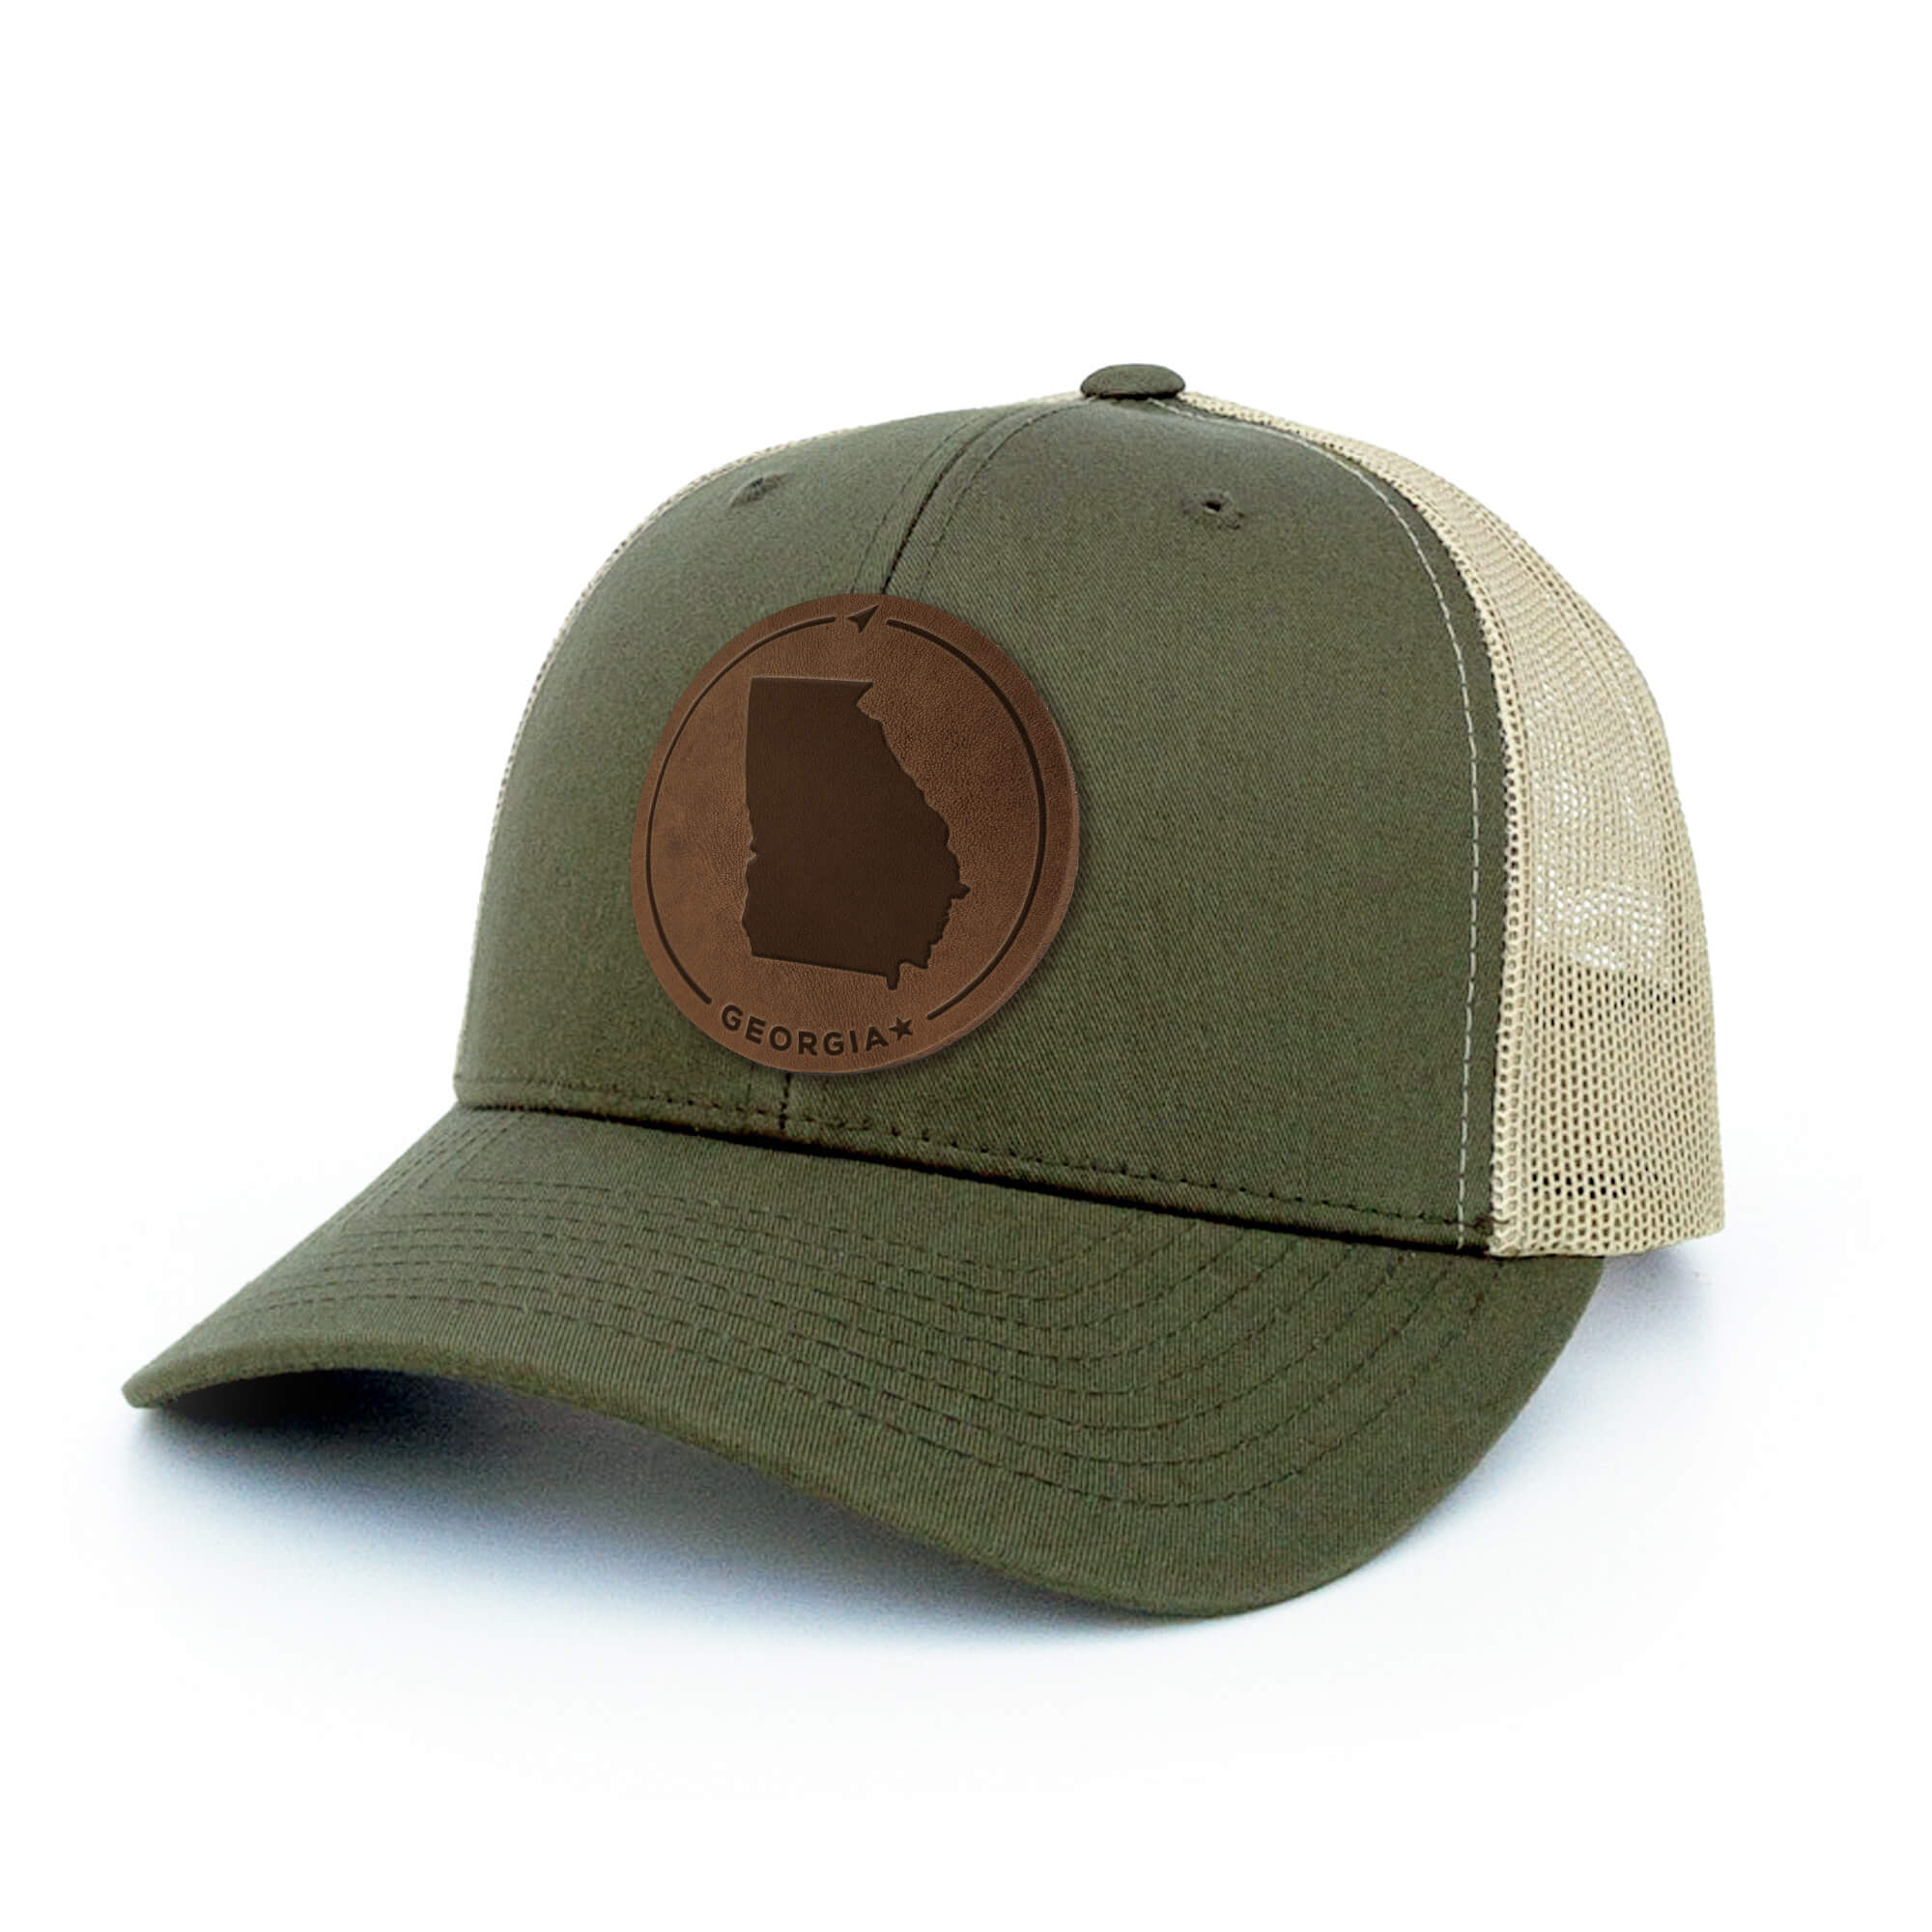 Moss Green and khaki trucker hat with full-grain leather patch of Georgia | BLACK-003-009, CHARC-003-009, NAVY-003-009, HGREY-003-009, MOSS-003-009, BROWN-003-009